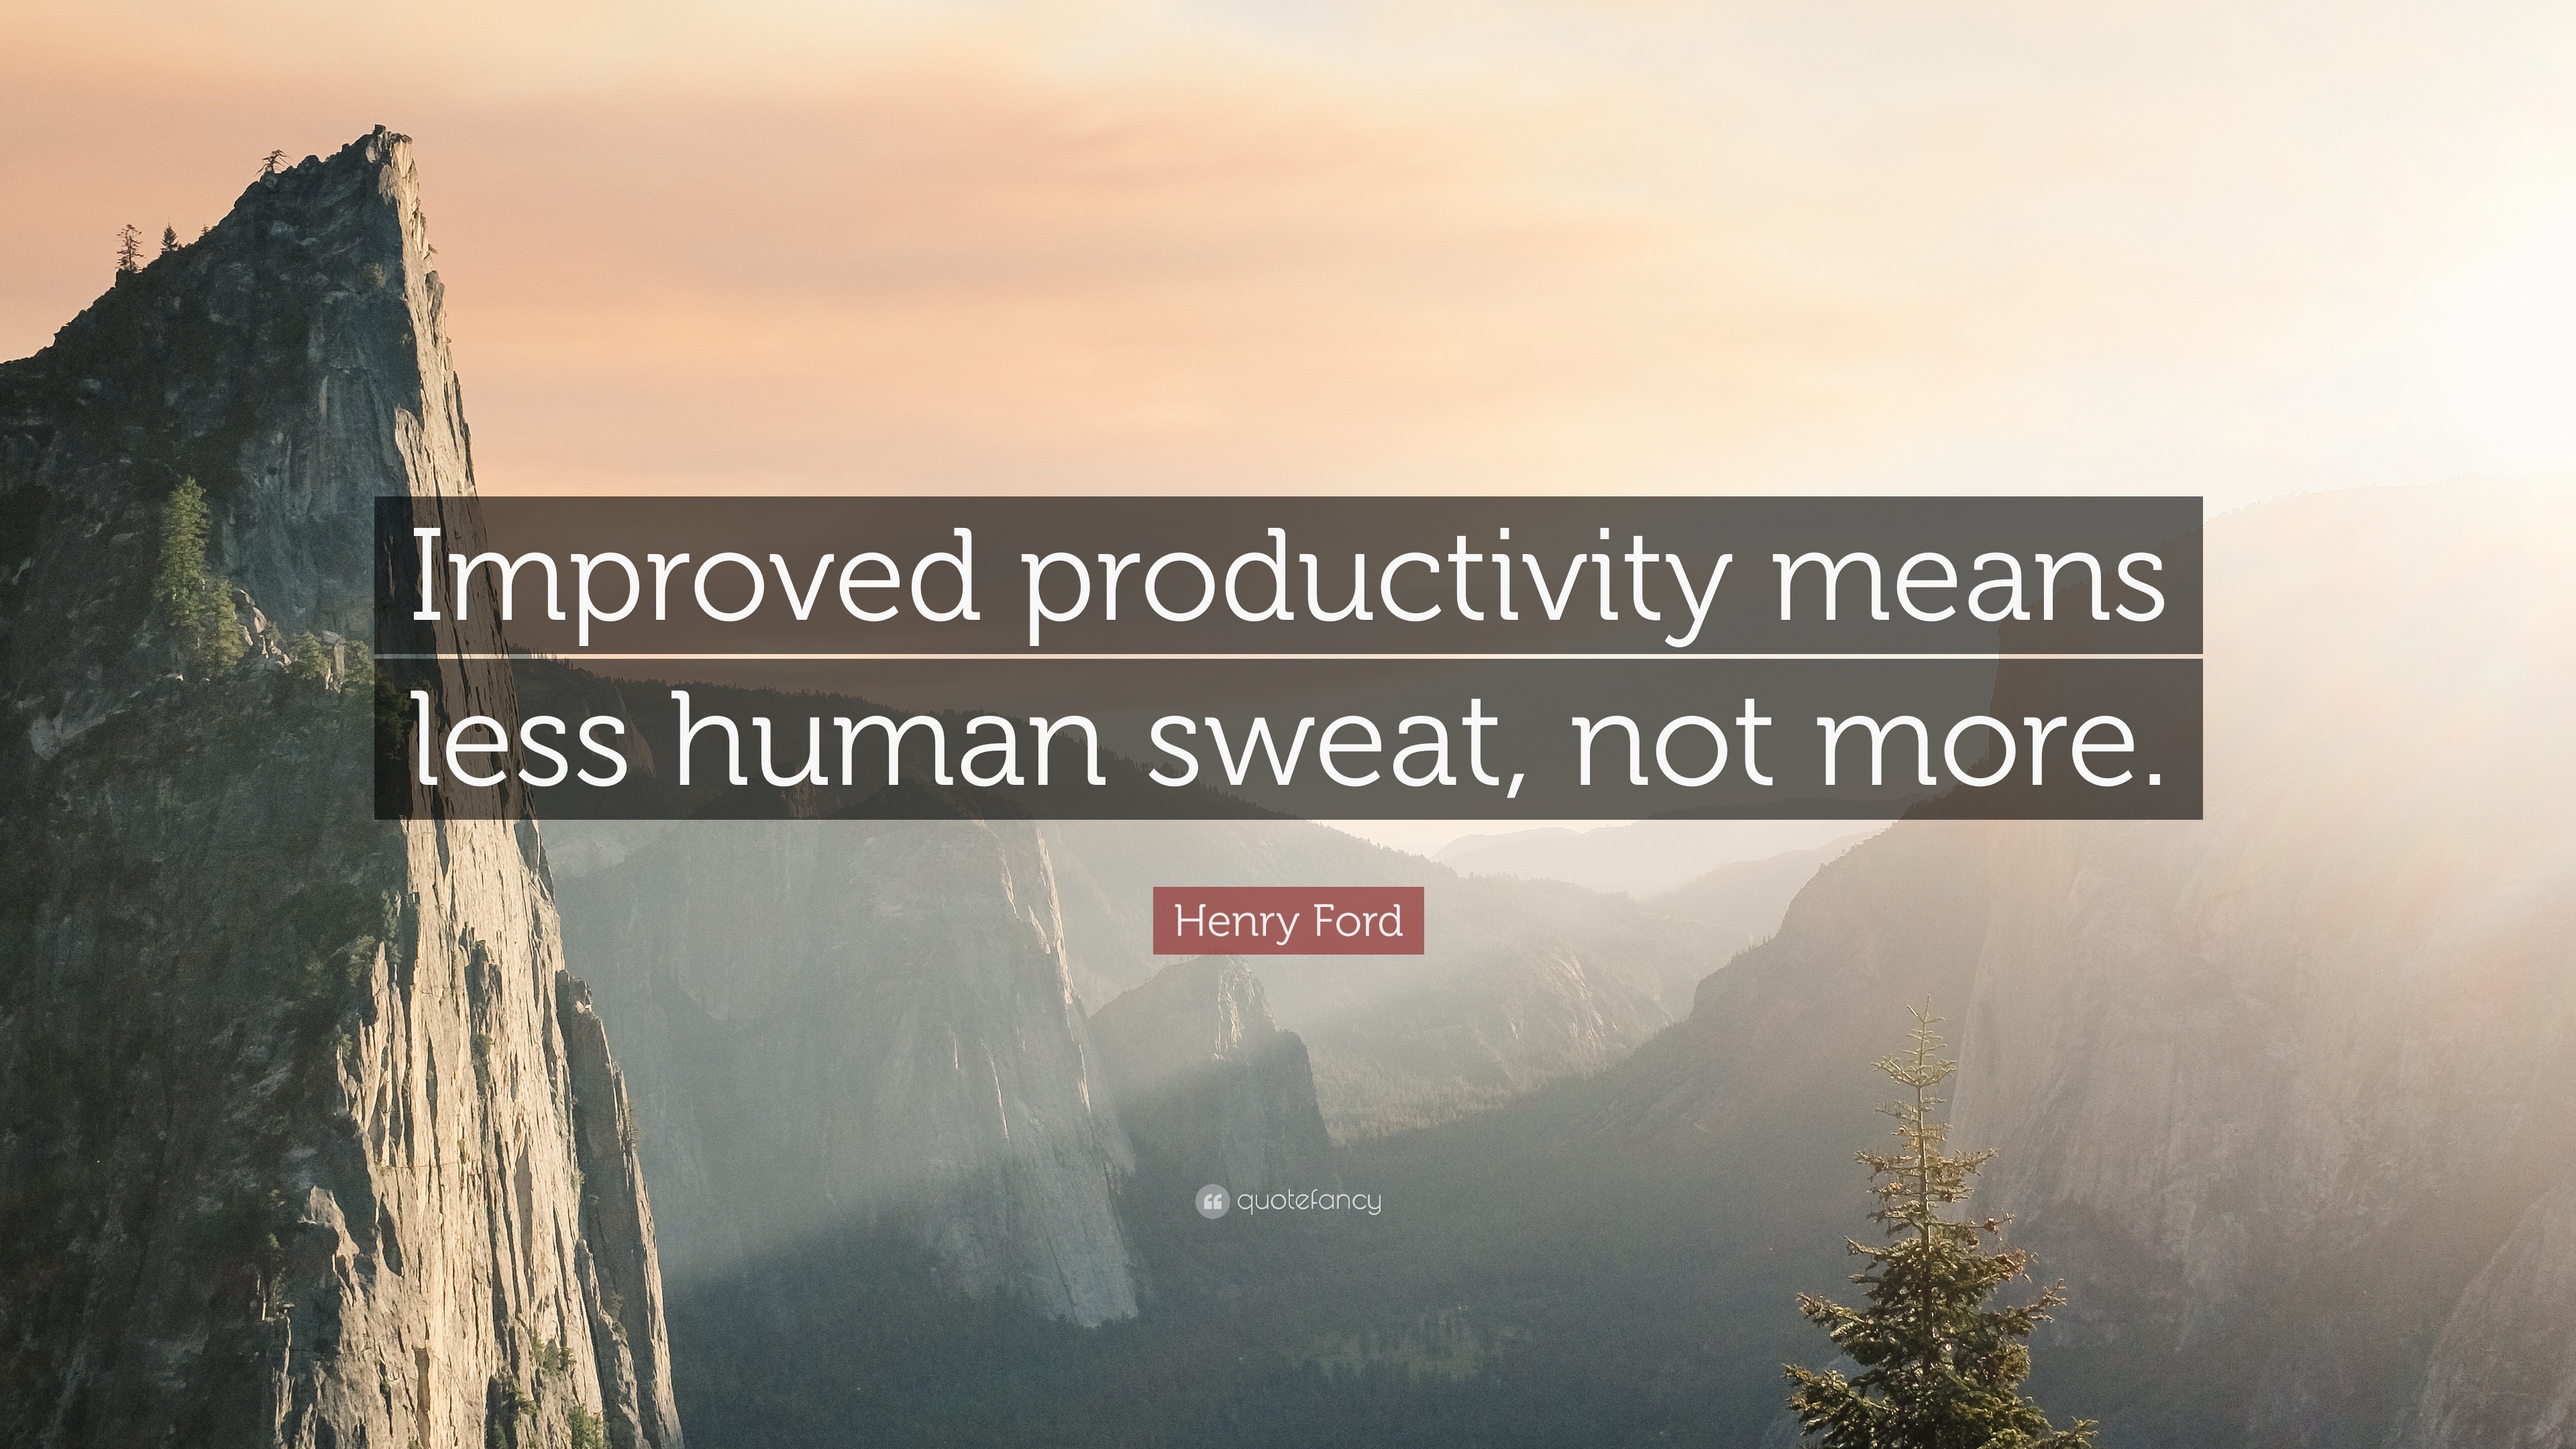 Henry Ford Quotes (100 wallpapers) - Quotefancy